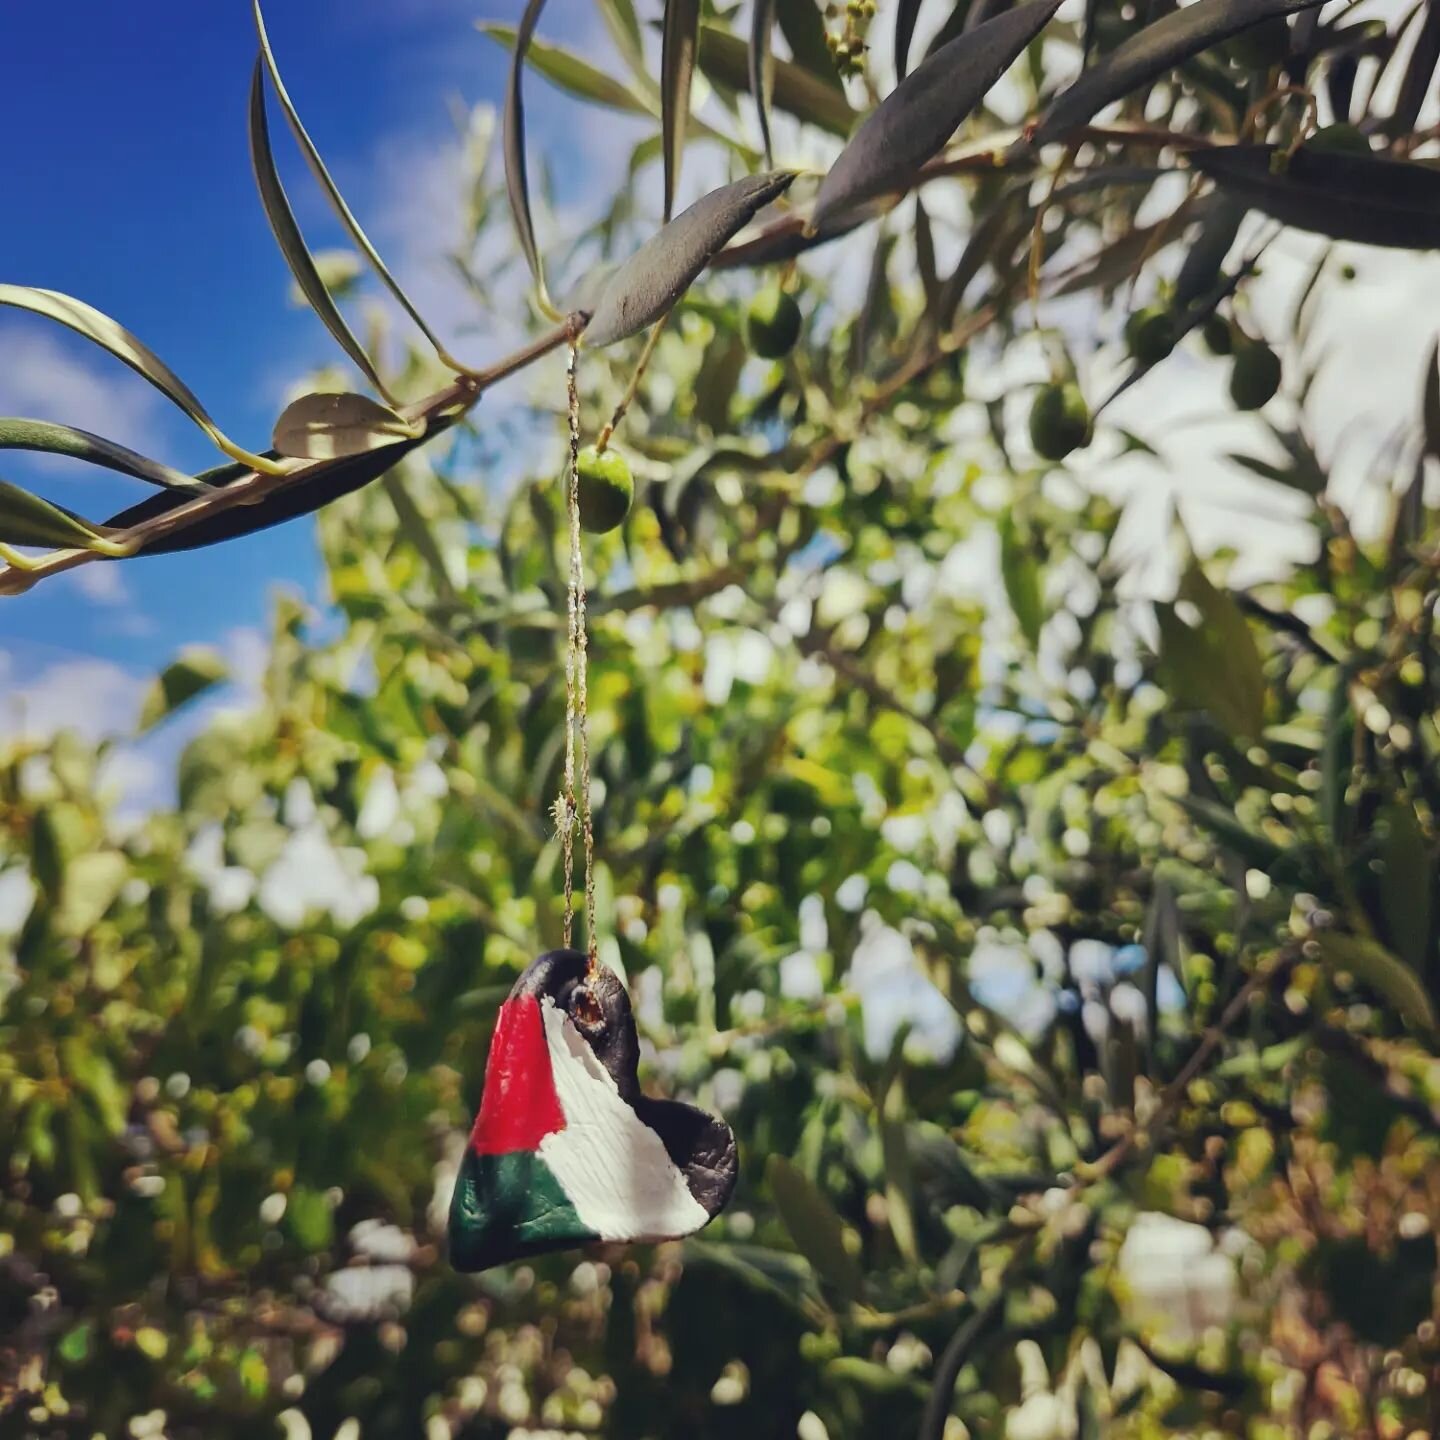 My heart is in Palestine and Palestine is in my heart. I've hung this hand-made ornament in my olive tree. It is now a site of connection and prayer. A prayer for the people of Palestine, that they may feel the love that the world holds for them amid